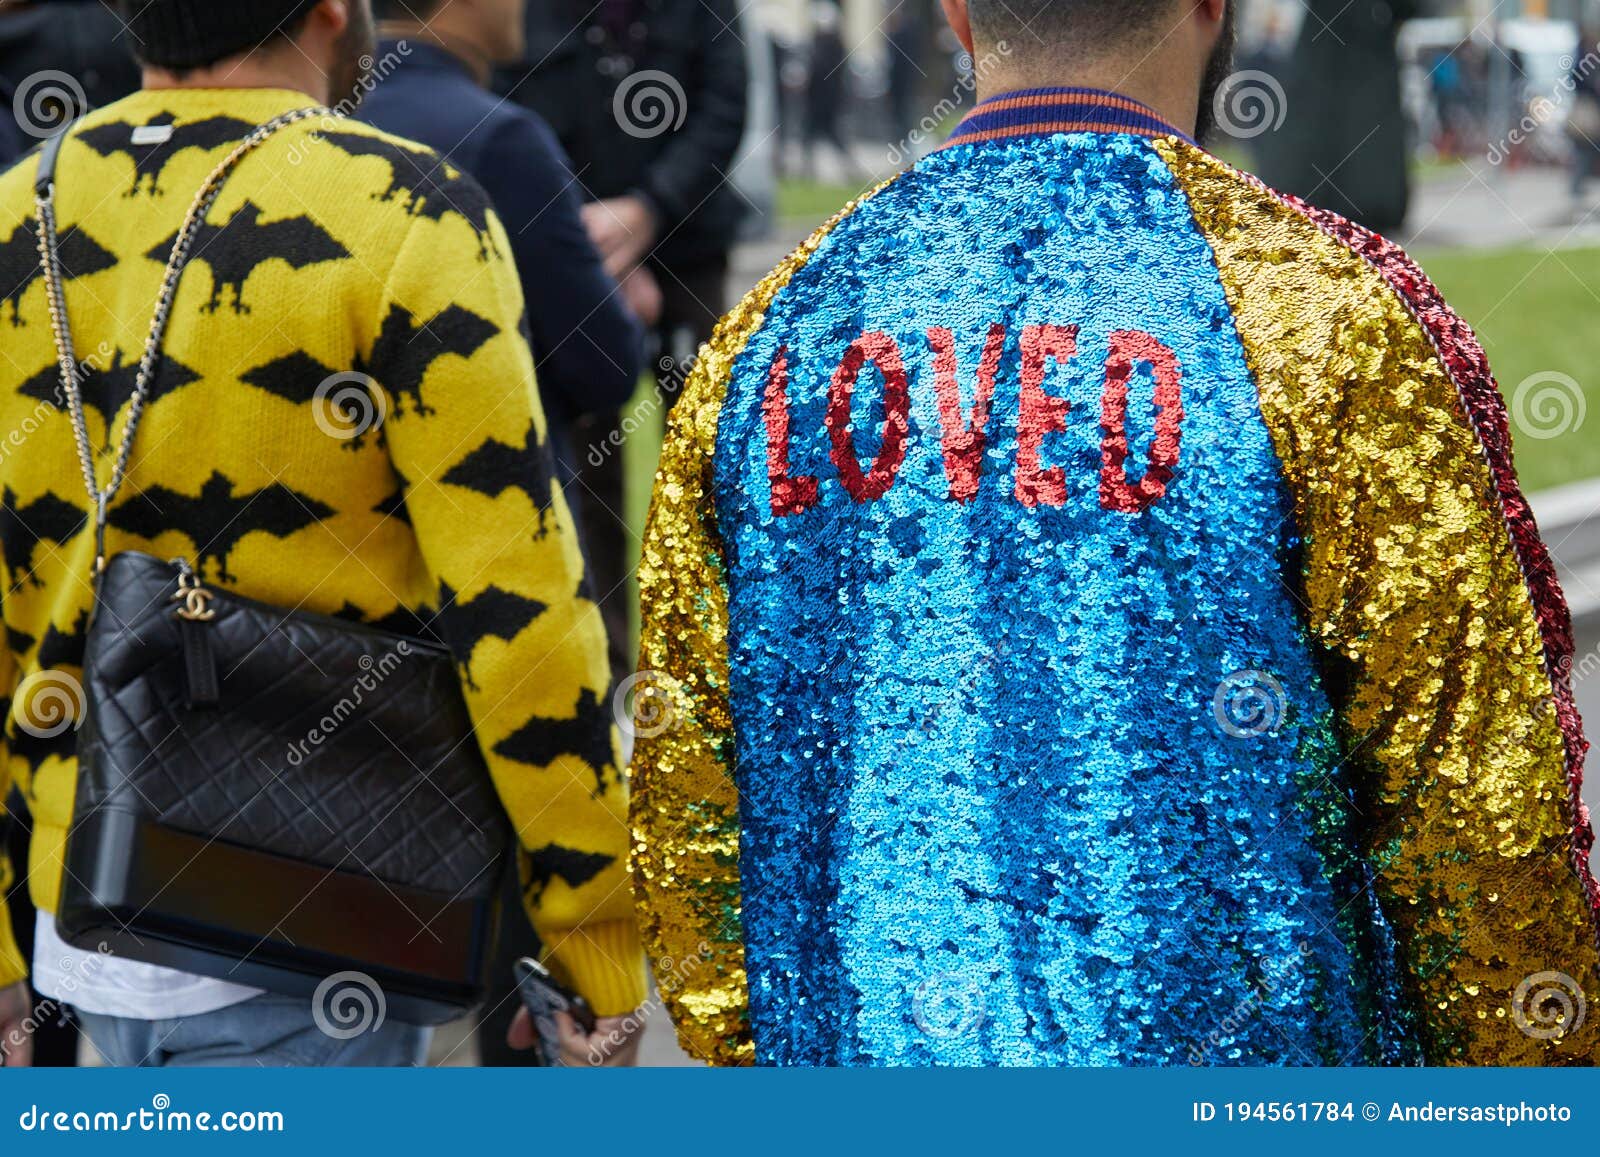 Men with Yellow and Blue Sequin Jacket and Chanel Bag before Giorgio Armani  Fashion Show, Milan Fashion Week Editorial Stock Image - Image of leather,  outfit: 194561784